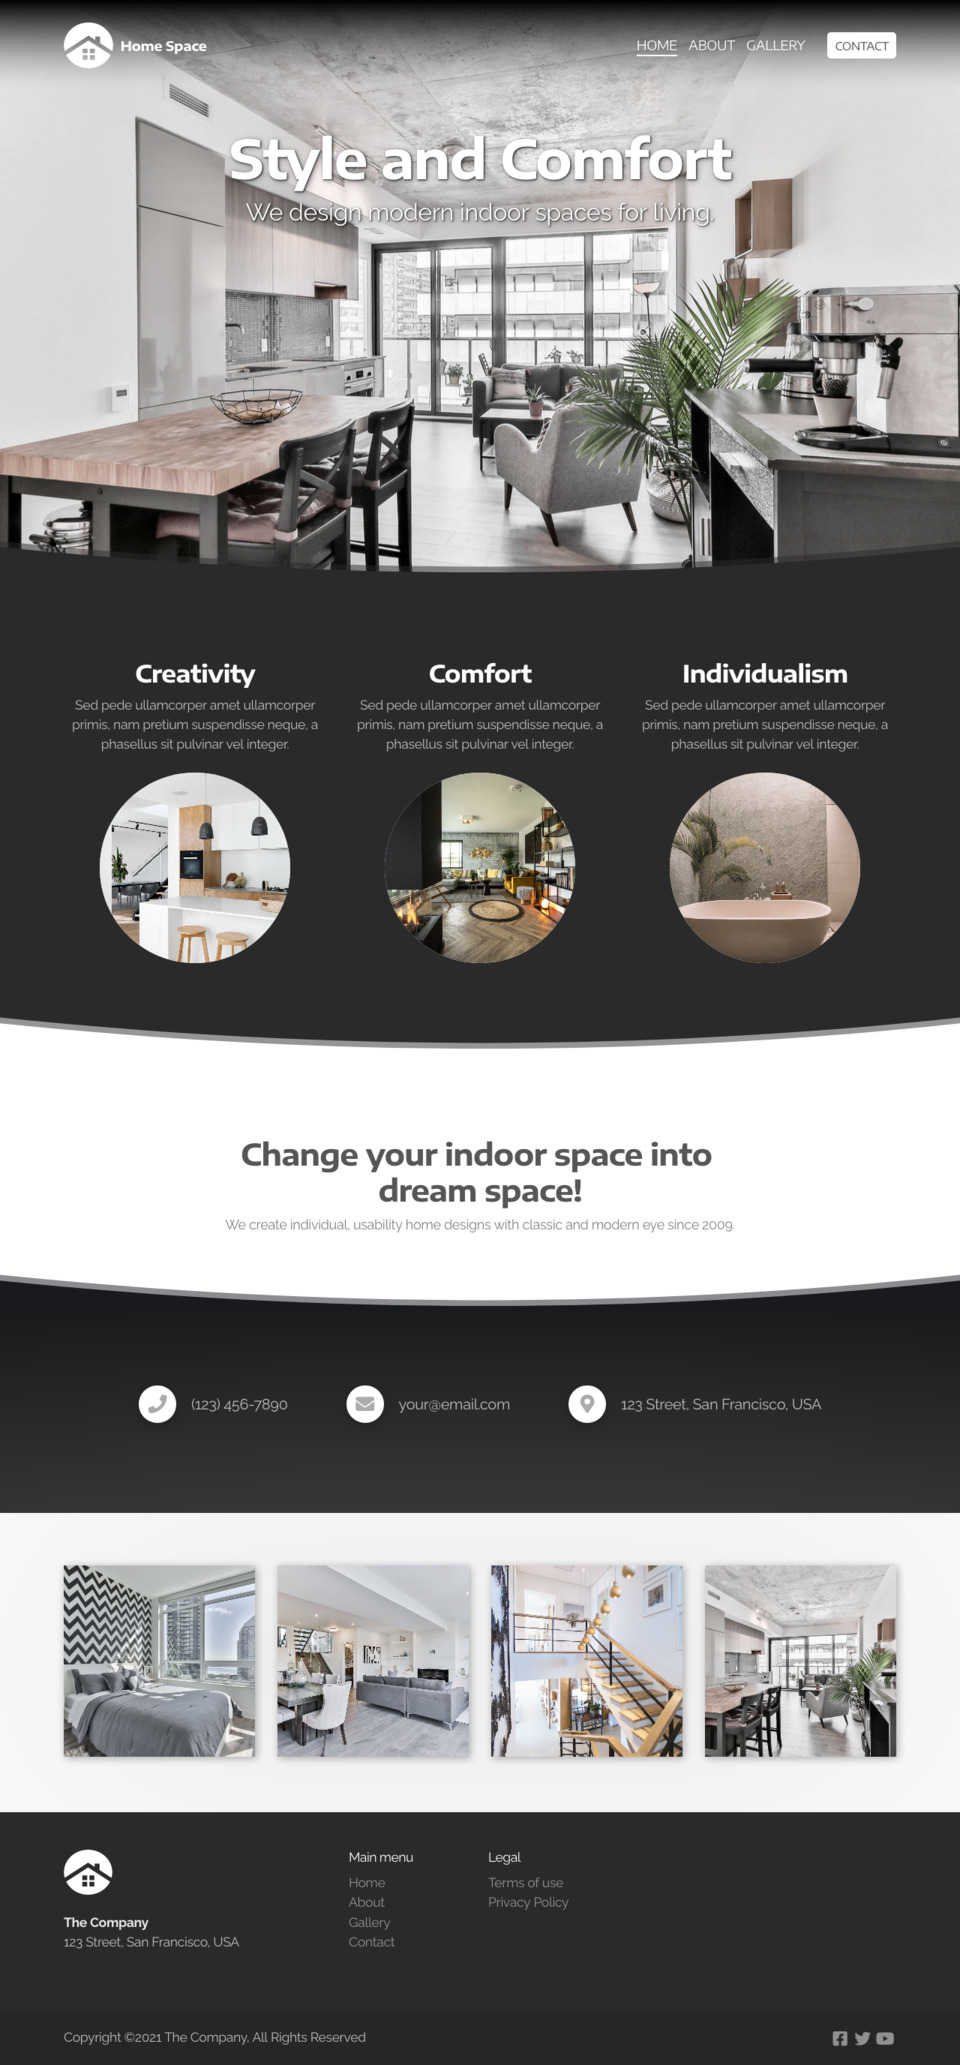 Home Space Website Template - Ideal for small businesses, interior designers, home decorators, and anyone looking to showcase their projects online.